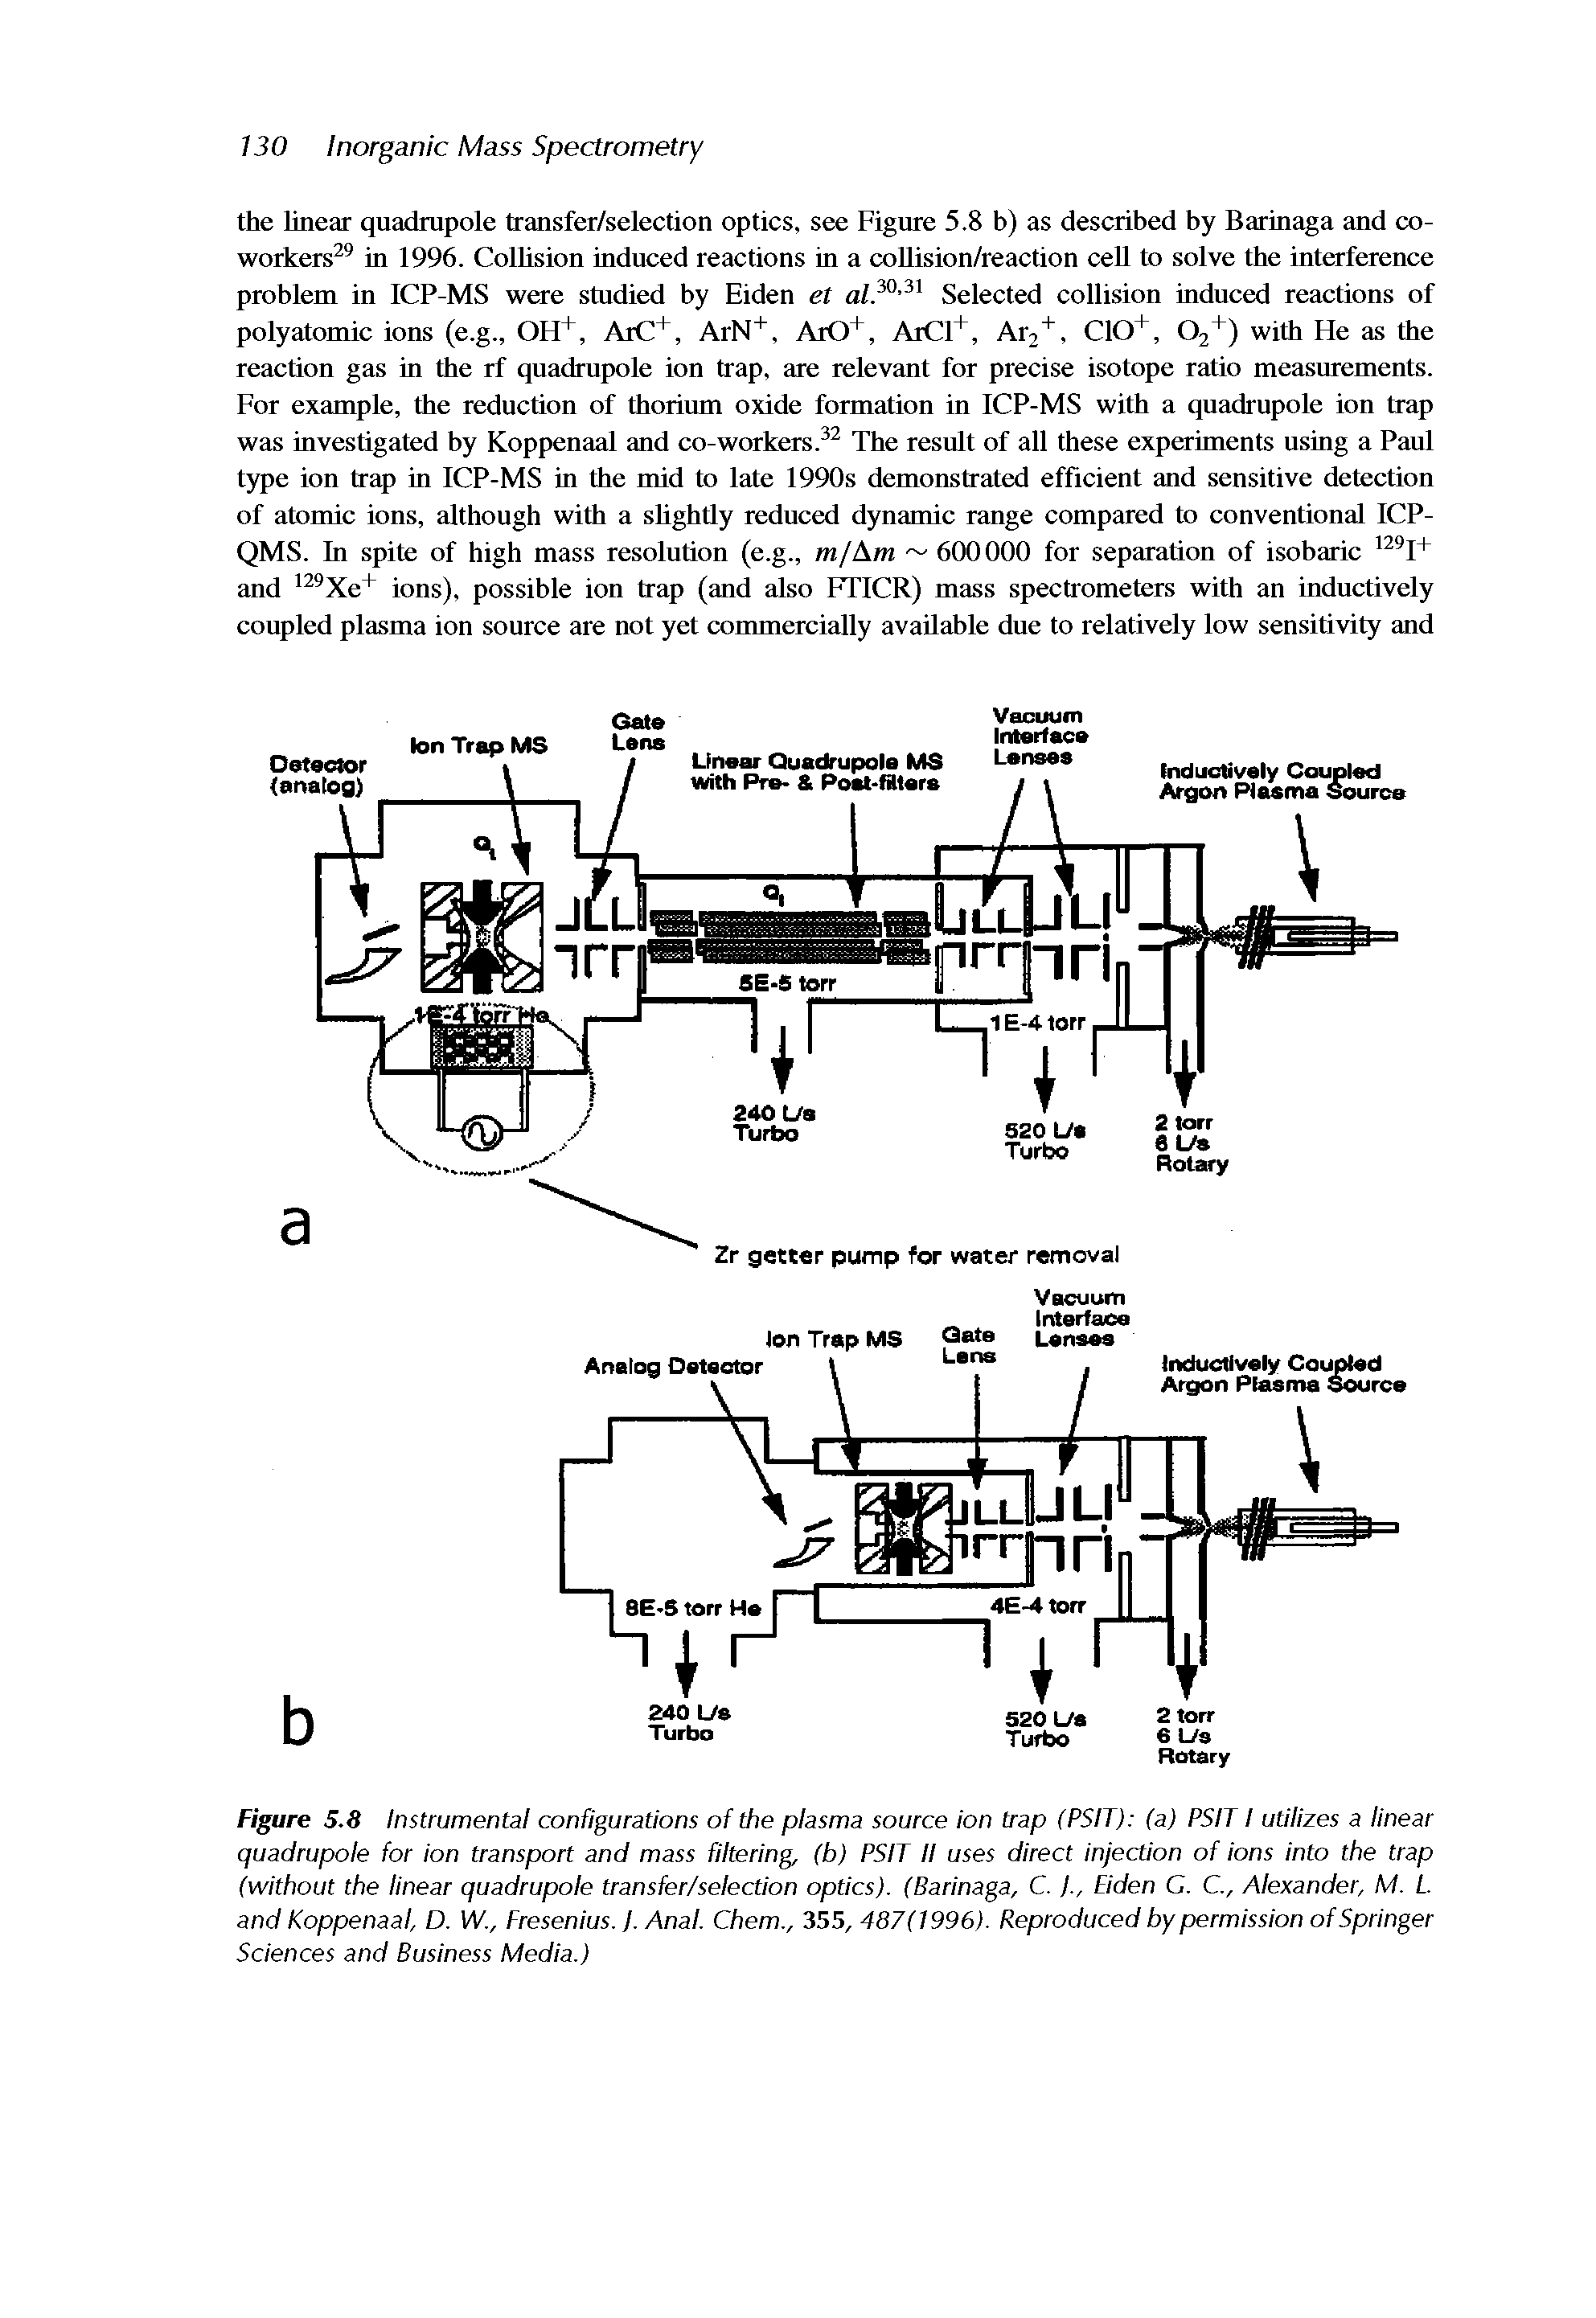 Figure 5.8 Instrumental configurations of the plasma source ion trap (PSIT) (a) PSITI utilizes a linear quadrupole for ion transport and mass filtering, (b) PSIT II uses direct injection of ions into the trap (without the linear quadrupole transfer/selection optics). (Barinaga, C. Eiden . C., Alexander, M. L. and Koppenaal, D. W., Fresenius. J. Anal. Chem., 355, 487(1996). Reproduced by permission of Springer Sciences and Business Media.)...